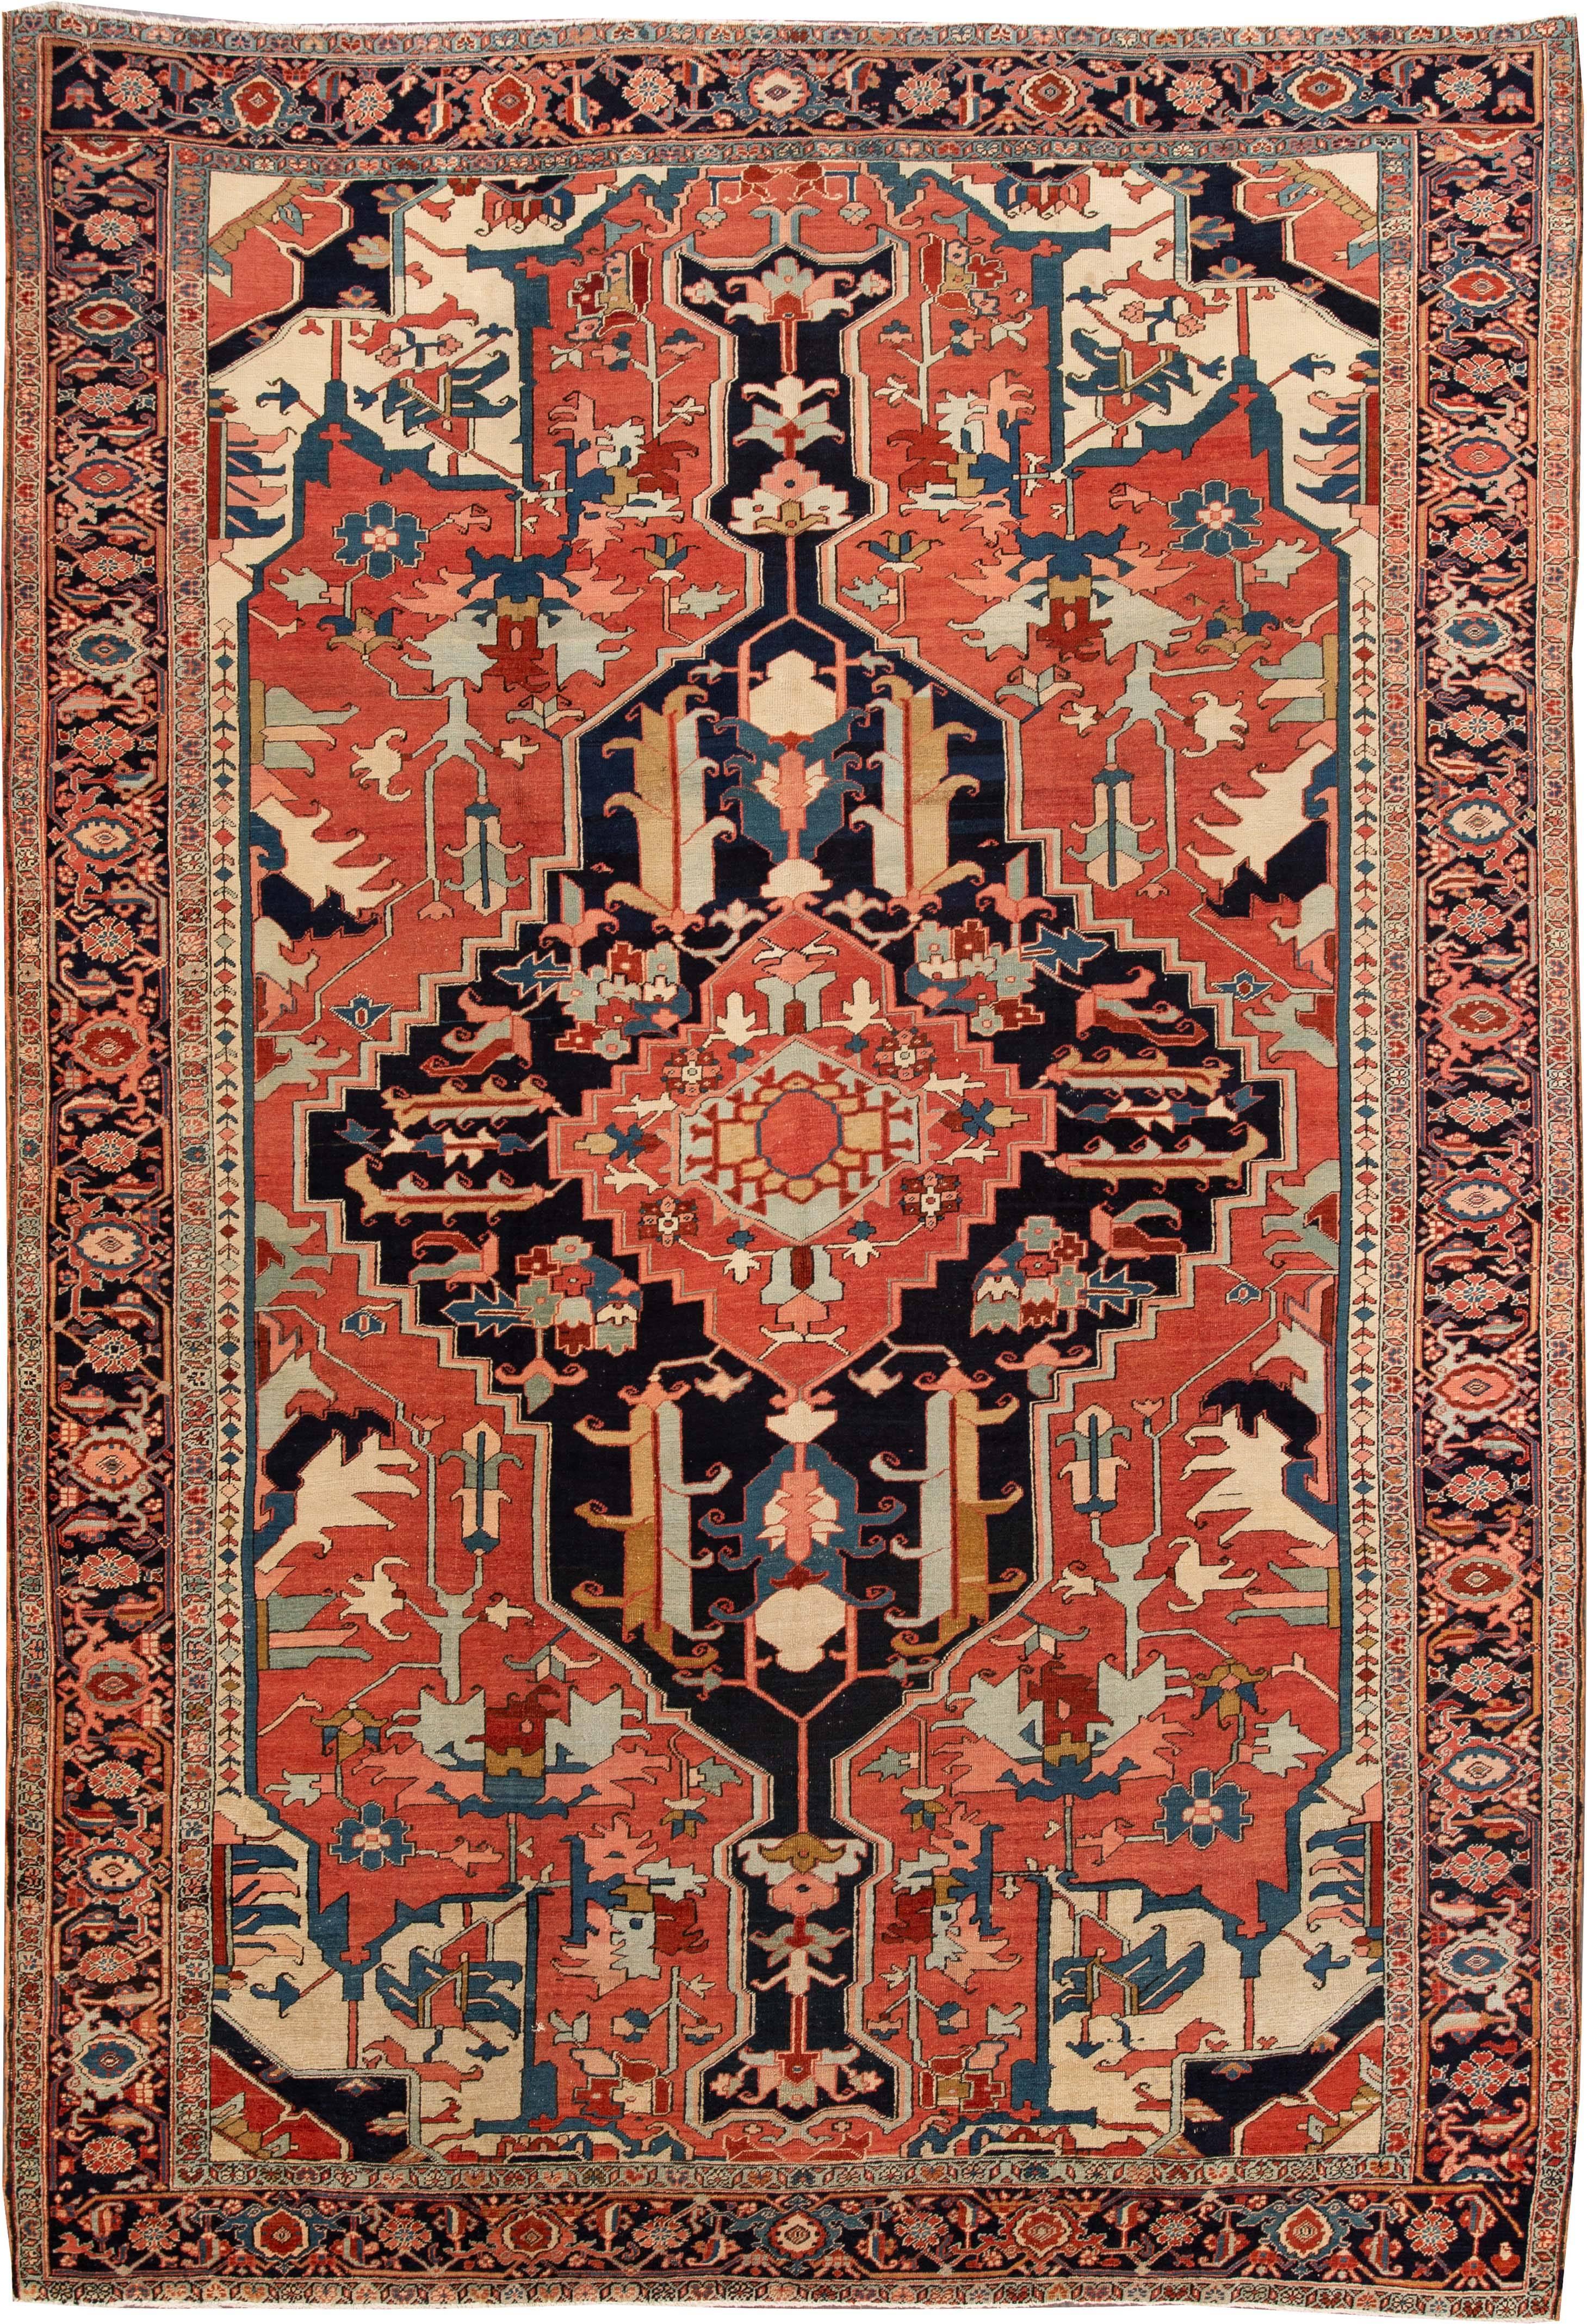 19th century (1880s) Persian Heriz rug with a rust field and traditional design in blue and cream. Measures approximately 9 feet by 13 feet. 